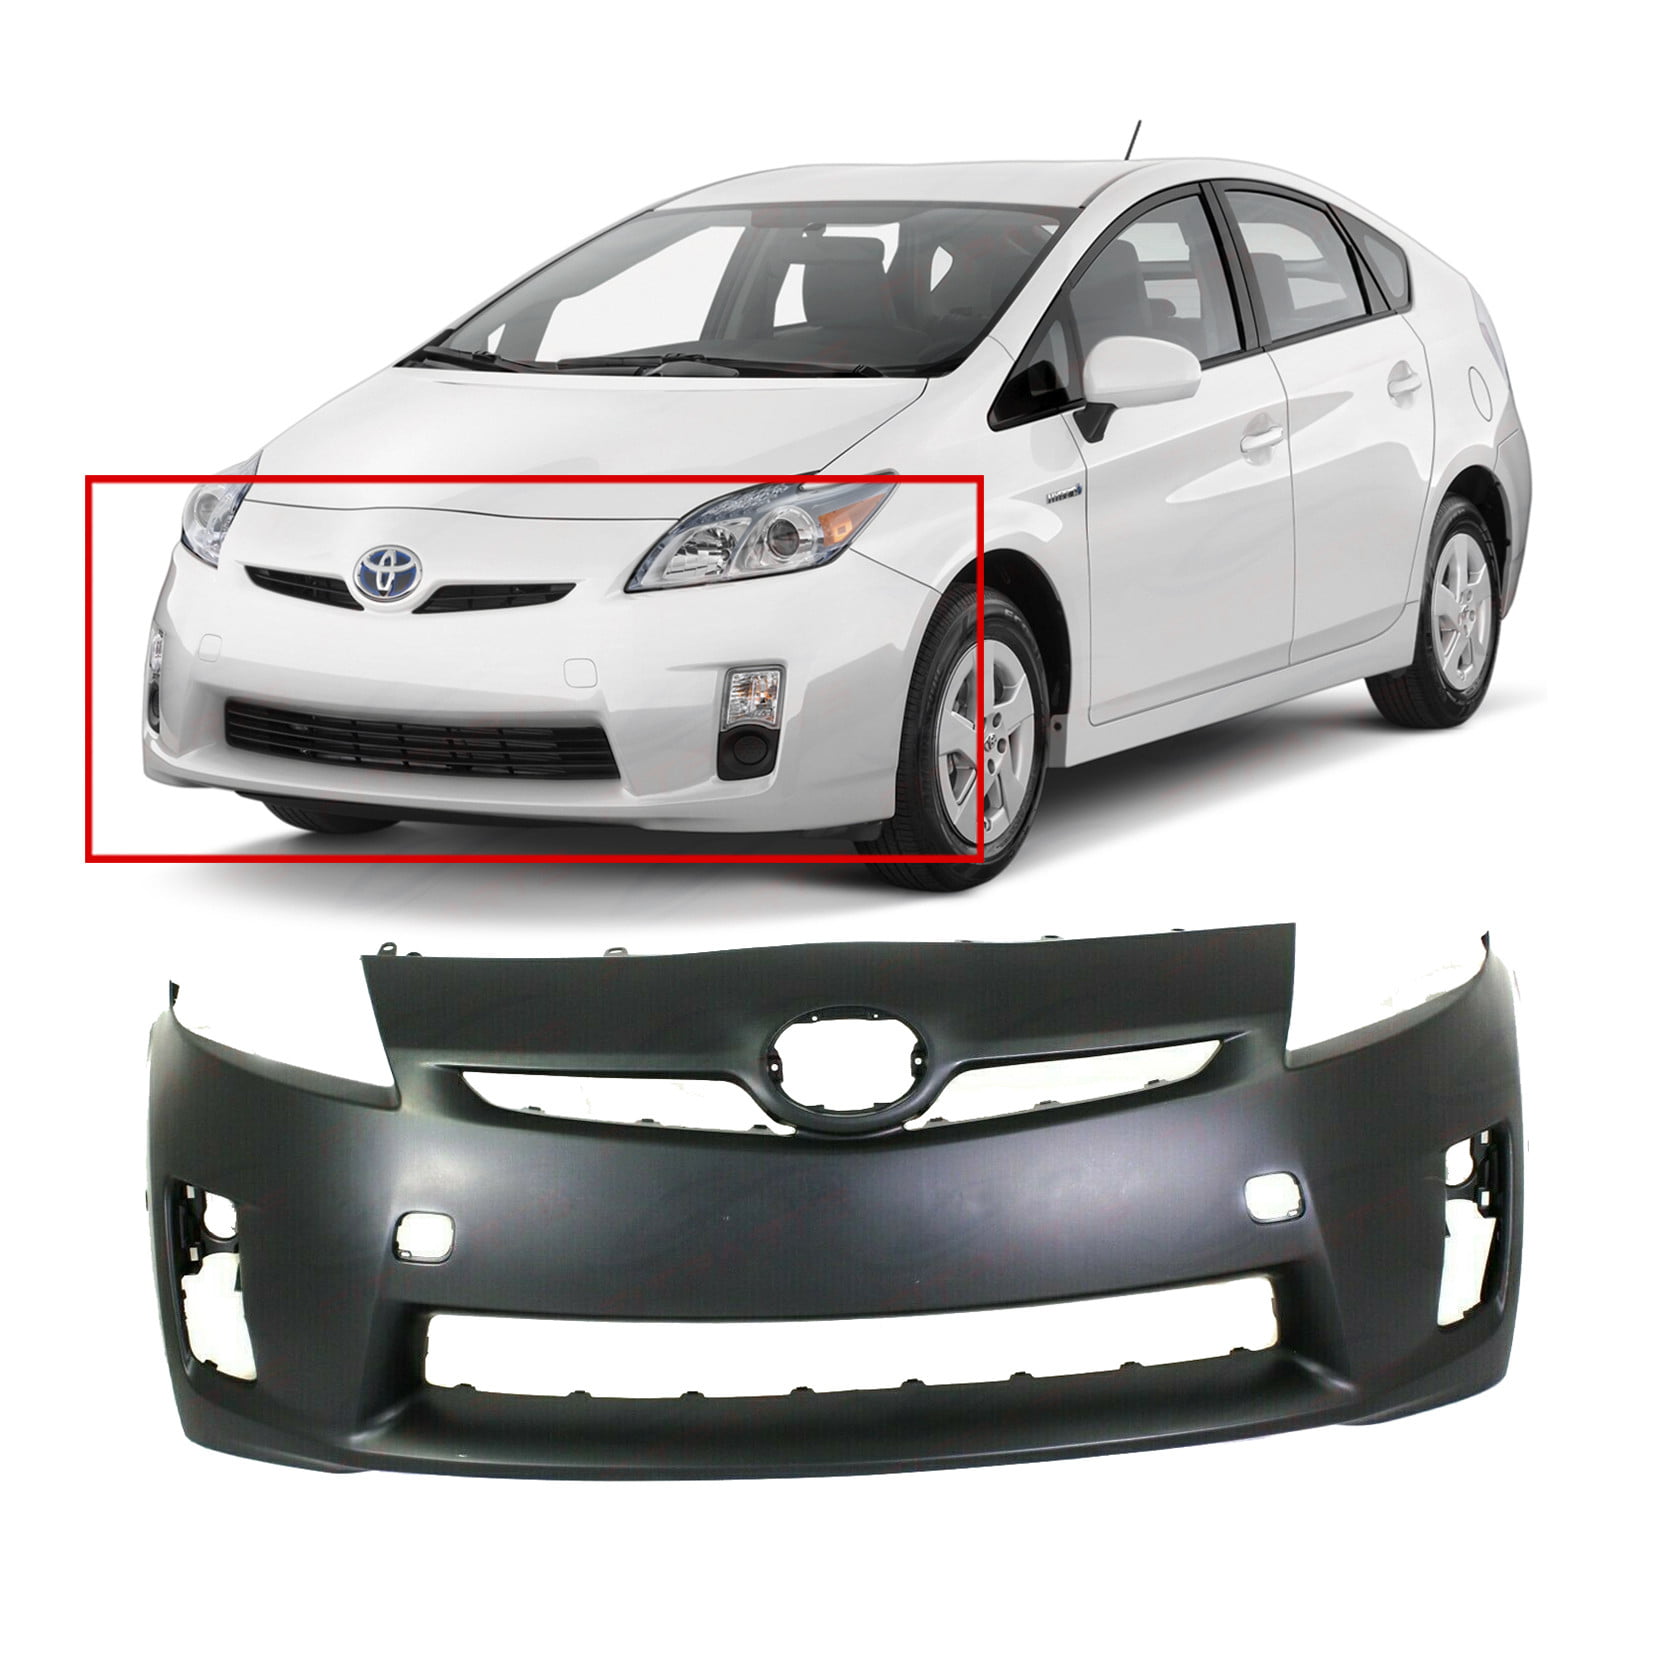 FOR 12-15 TOYOTA PRIUS BUMPER FOG LIGHT CHROME+HARNESS+SWITCH KIT W/GRILLE GRILL